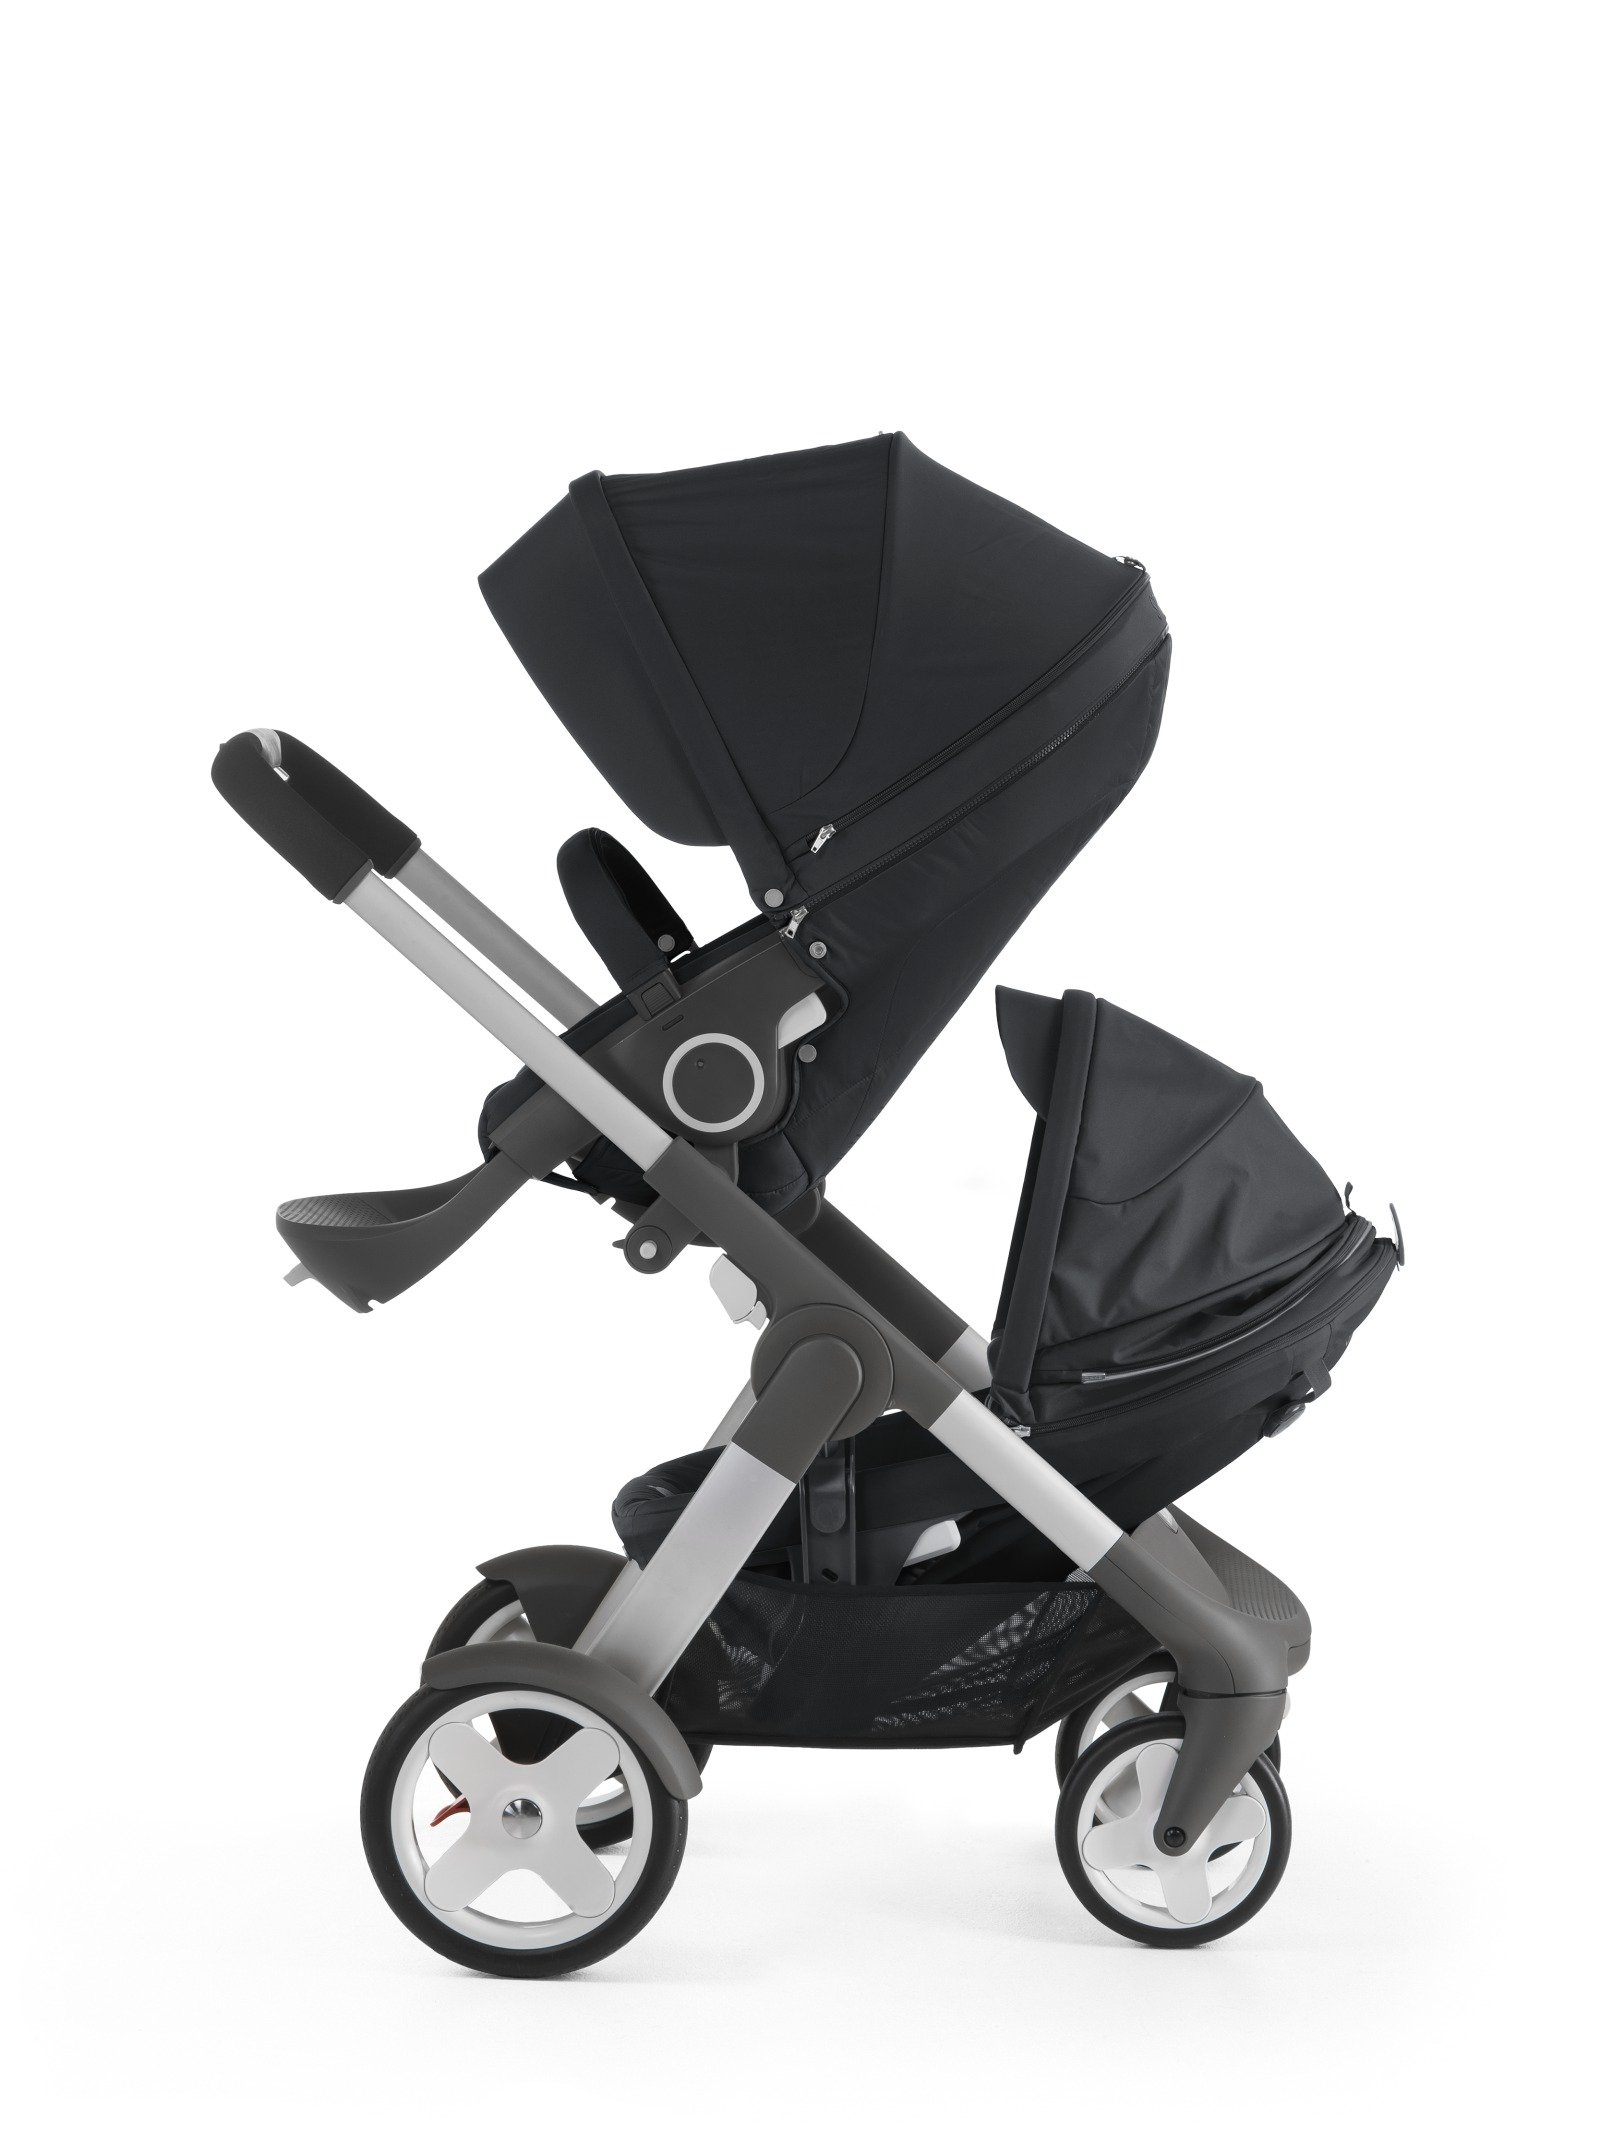 ebay baby stroller and carseat